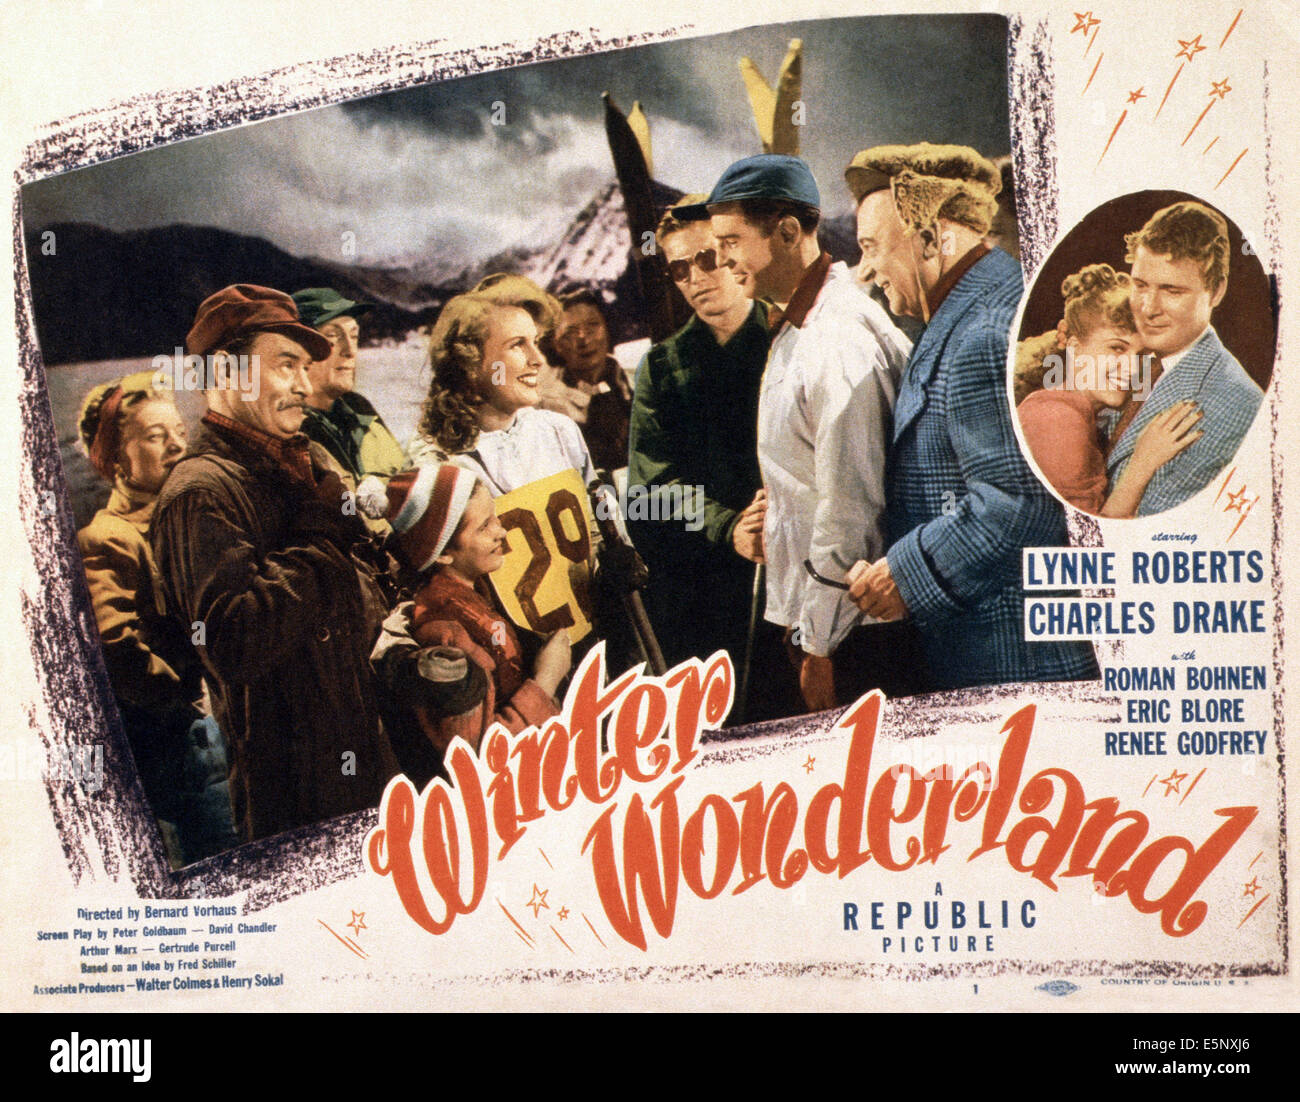 WINTER WONDERLAND, US poster, from left: Roman Bohnen, Elinor Donahue, Lynne Roberts, Eric Blore (fur hat right), in circle Stock Photo